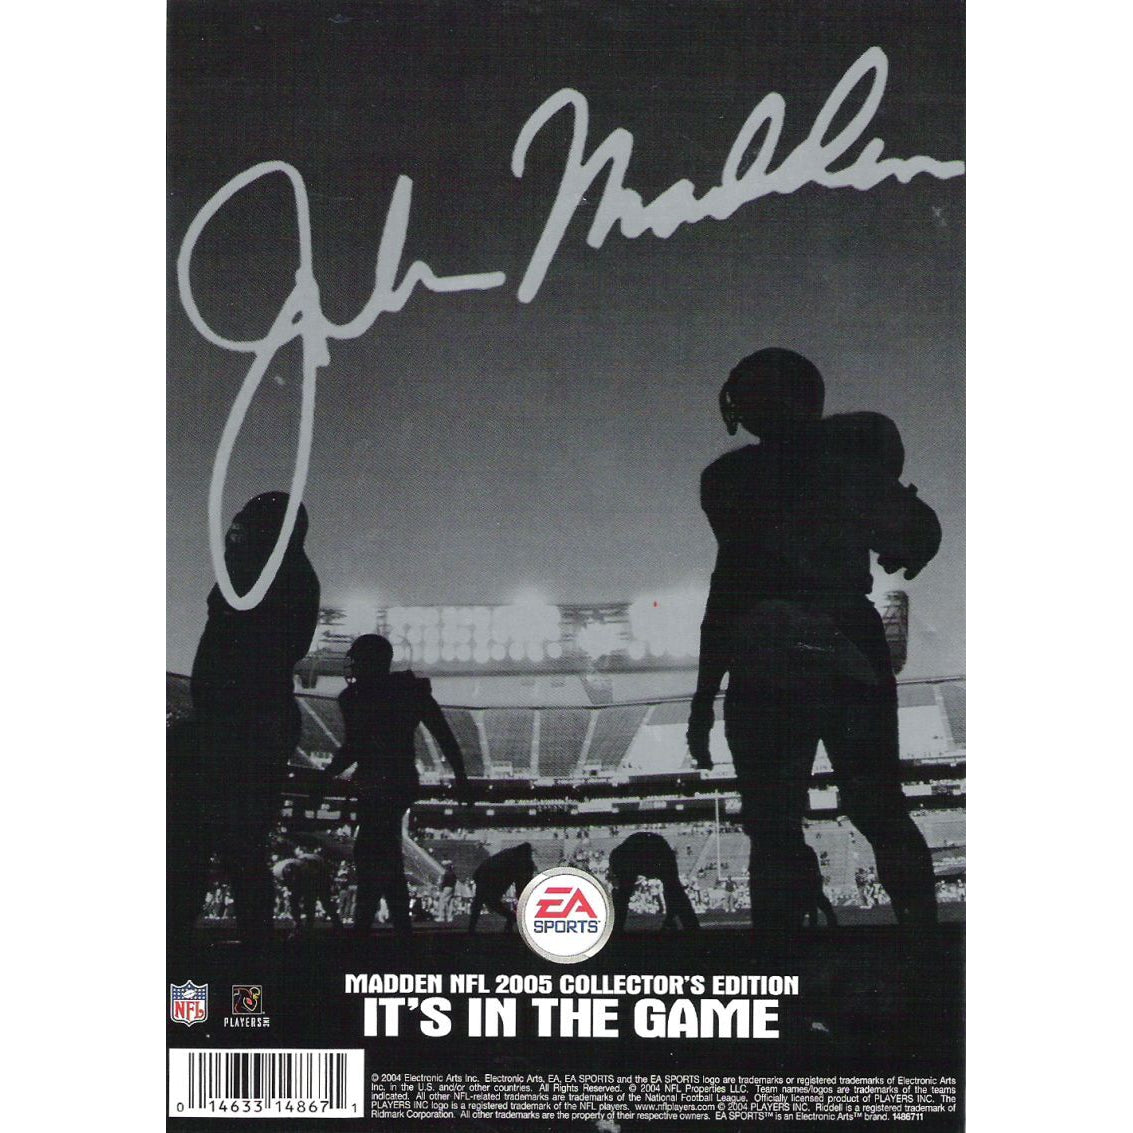 Madden 2005 Collector's Edition - PlayStation 2 (PS2) Game Complete - YourGamingShop.com - Buy, Sell, Trade Video Games Online. 120 Day Warranty. Satisfaction Guaranteed.